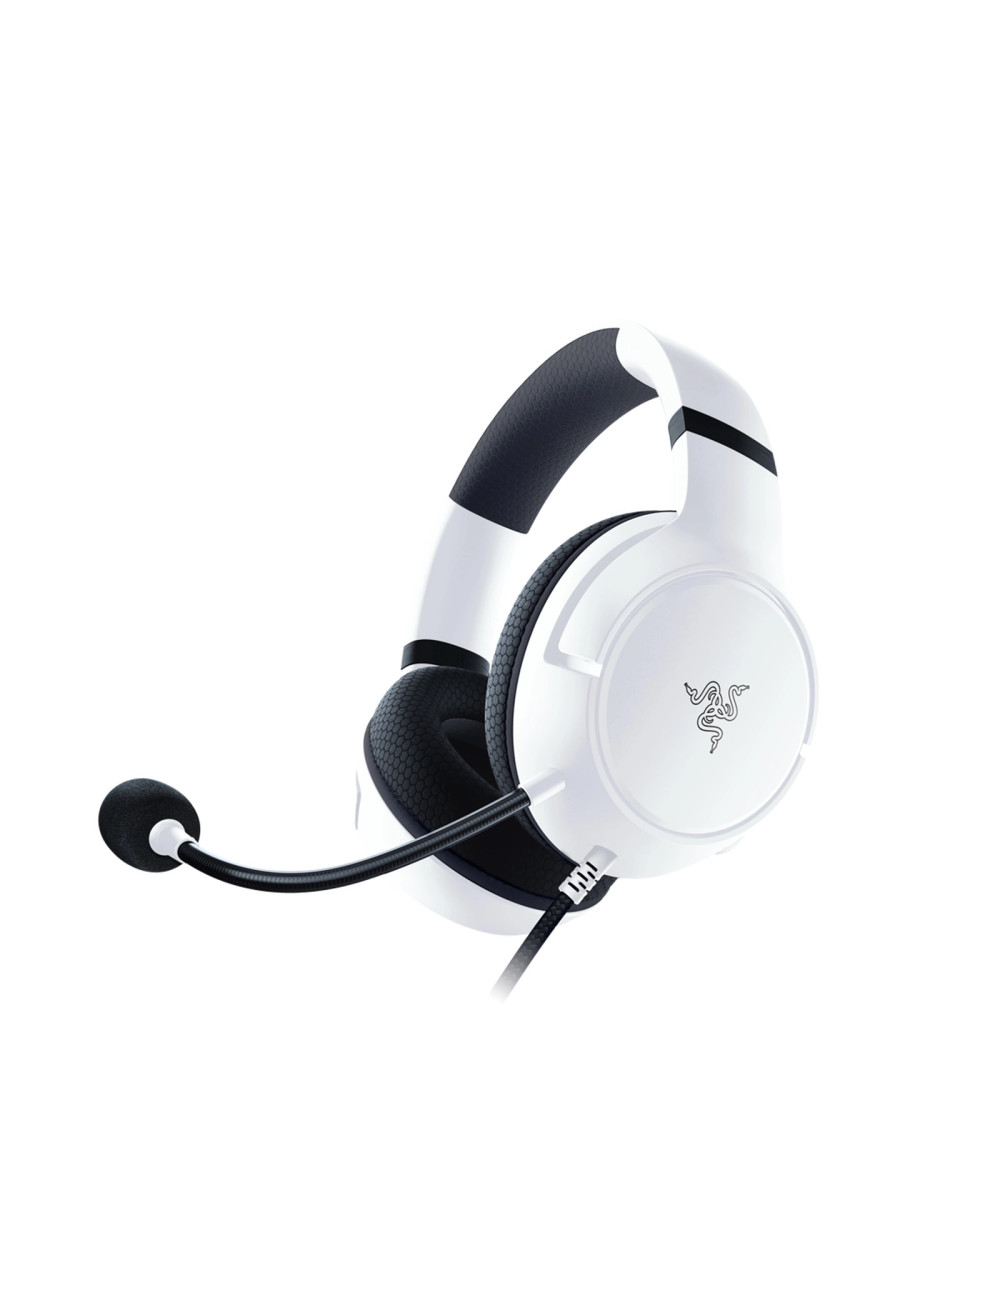 Razer | Gaming Headset for Xbox | Kaira X | Wired | Over-ear | Microphone